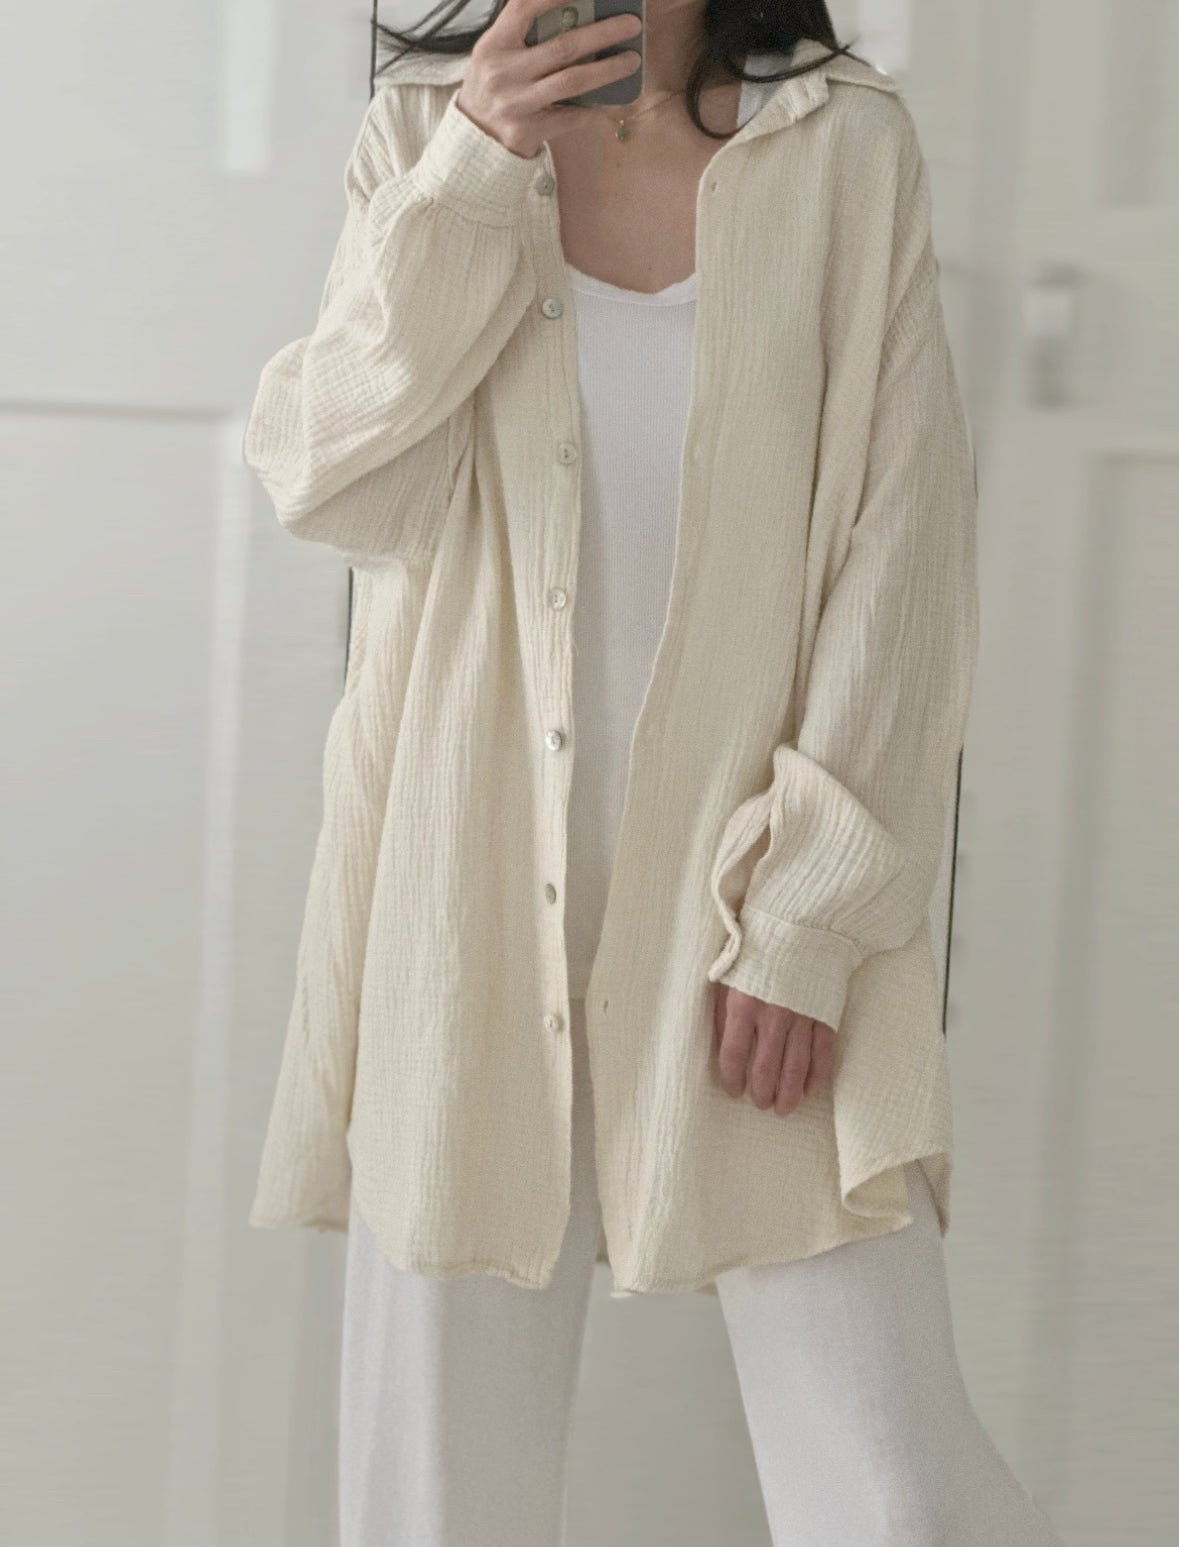 Musselin Bluse, long oversize, Cremeweiß